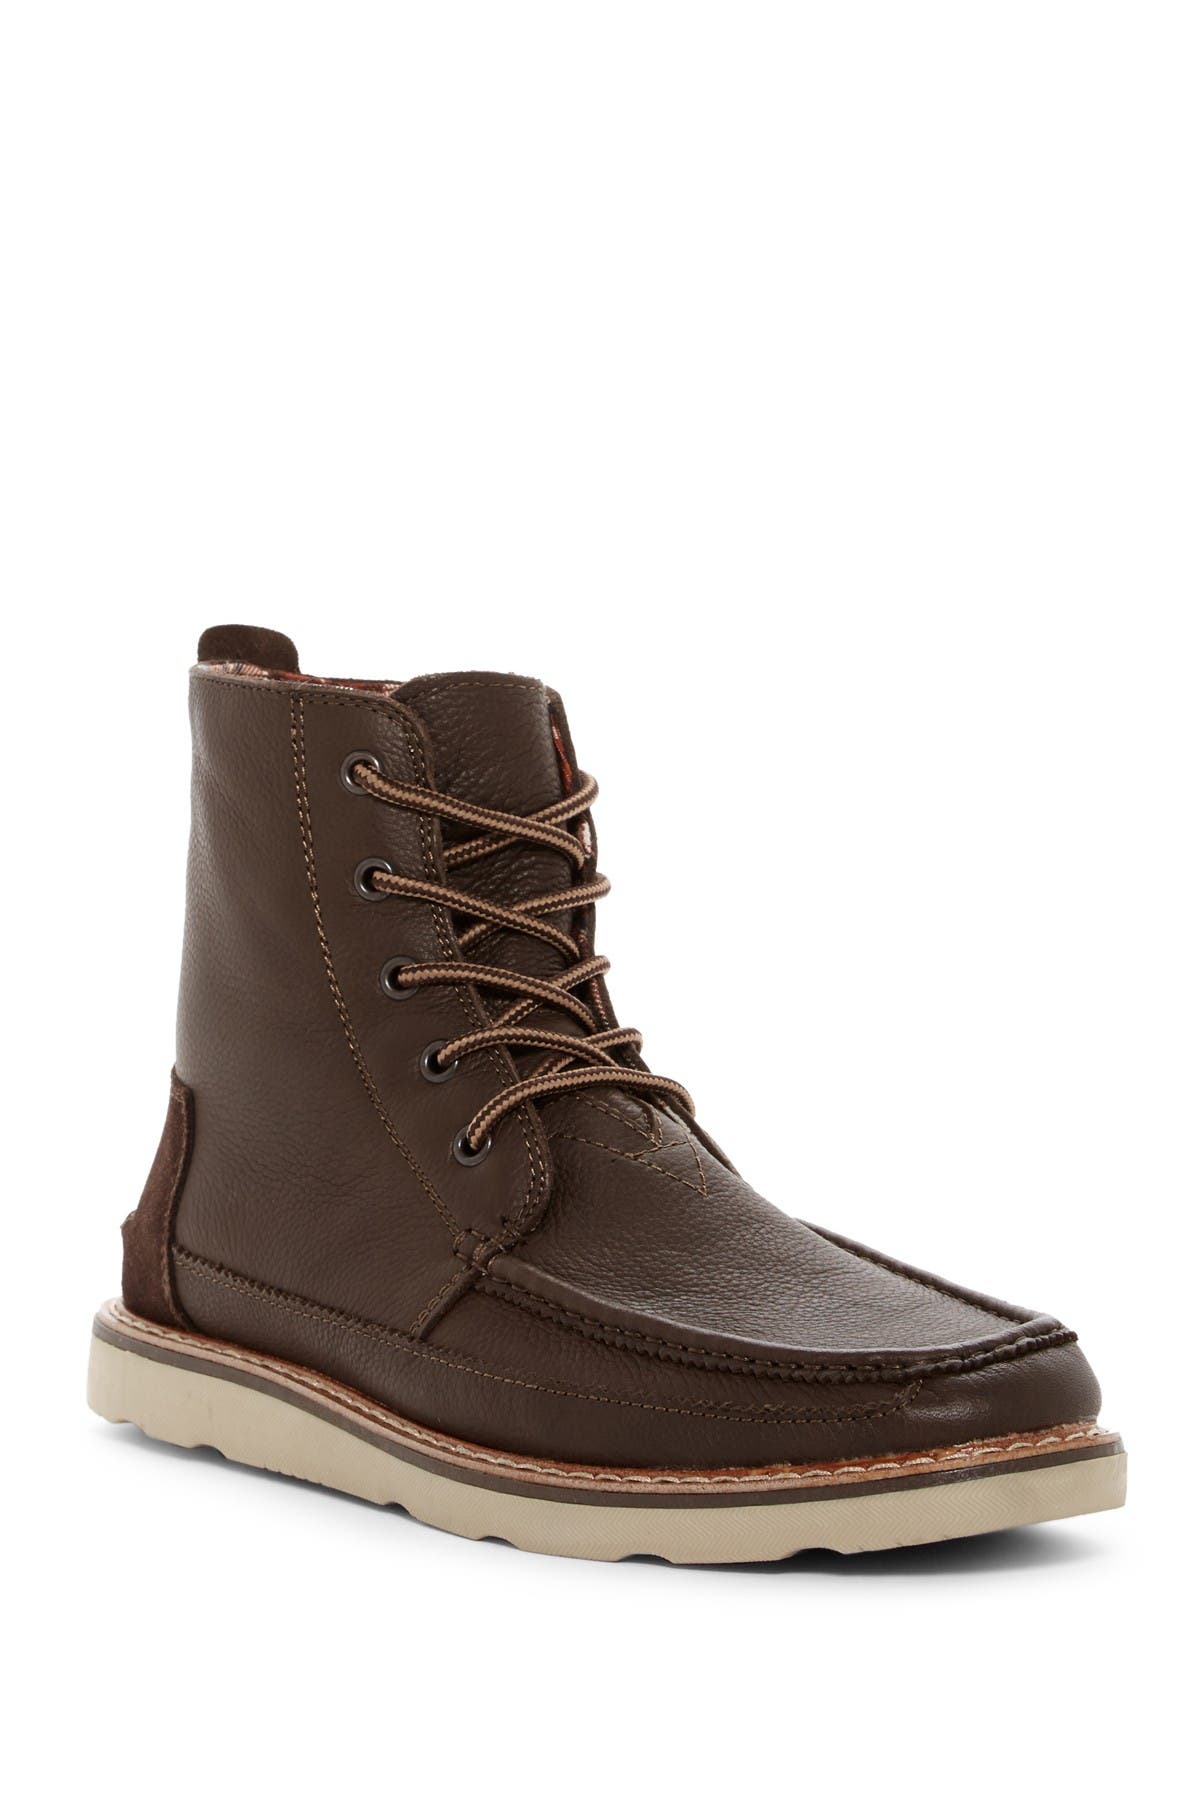 toms searcher leather boot